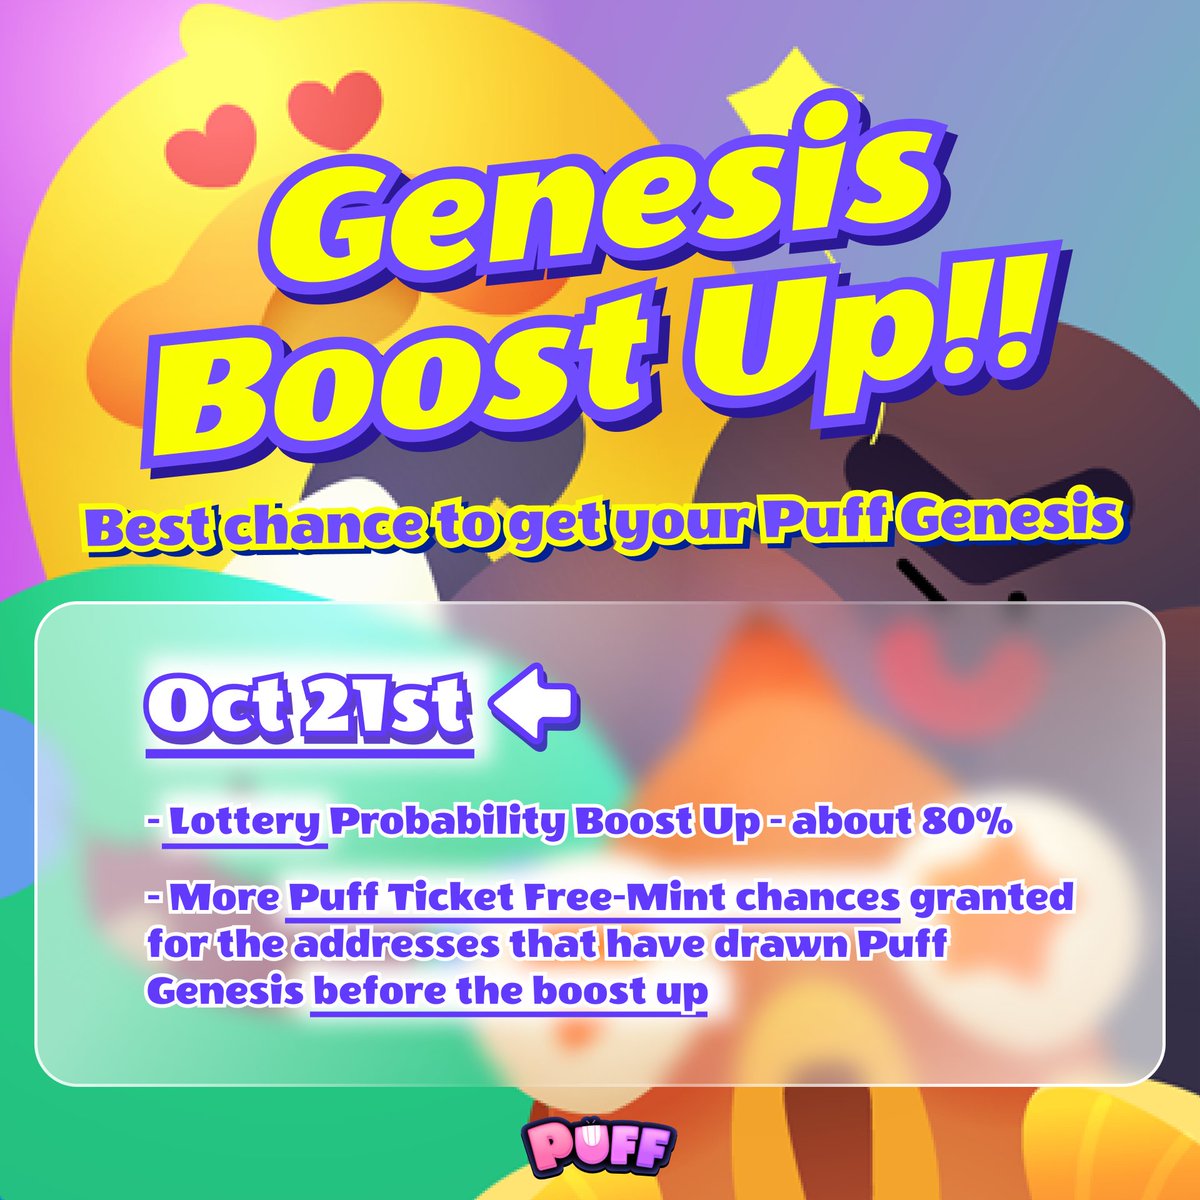 Learn about #PuffGenesis Boost Up 🎫 ⏳ Start on Oct 21st, the 3rd week of Free Mint & Genesis Lottery 🧮 Probability of winning Genesis increased to 80% 👥 Genesis holders get extra chances to mint Hold Genesis to join upcoming events on Nov Details 🔗 bit.ly/3yOsRhW